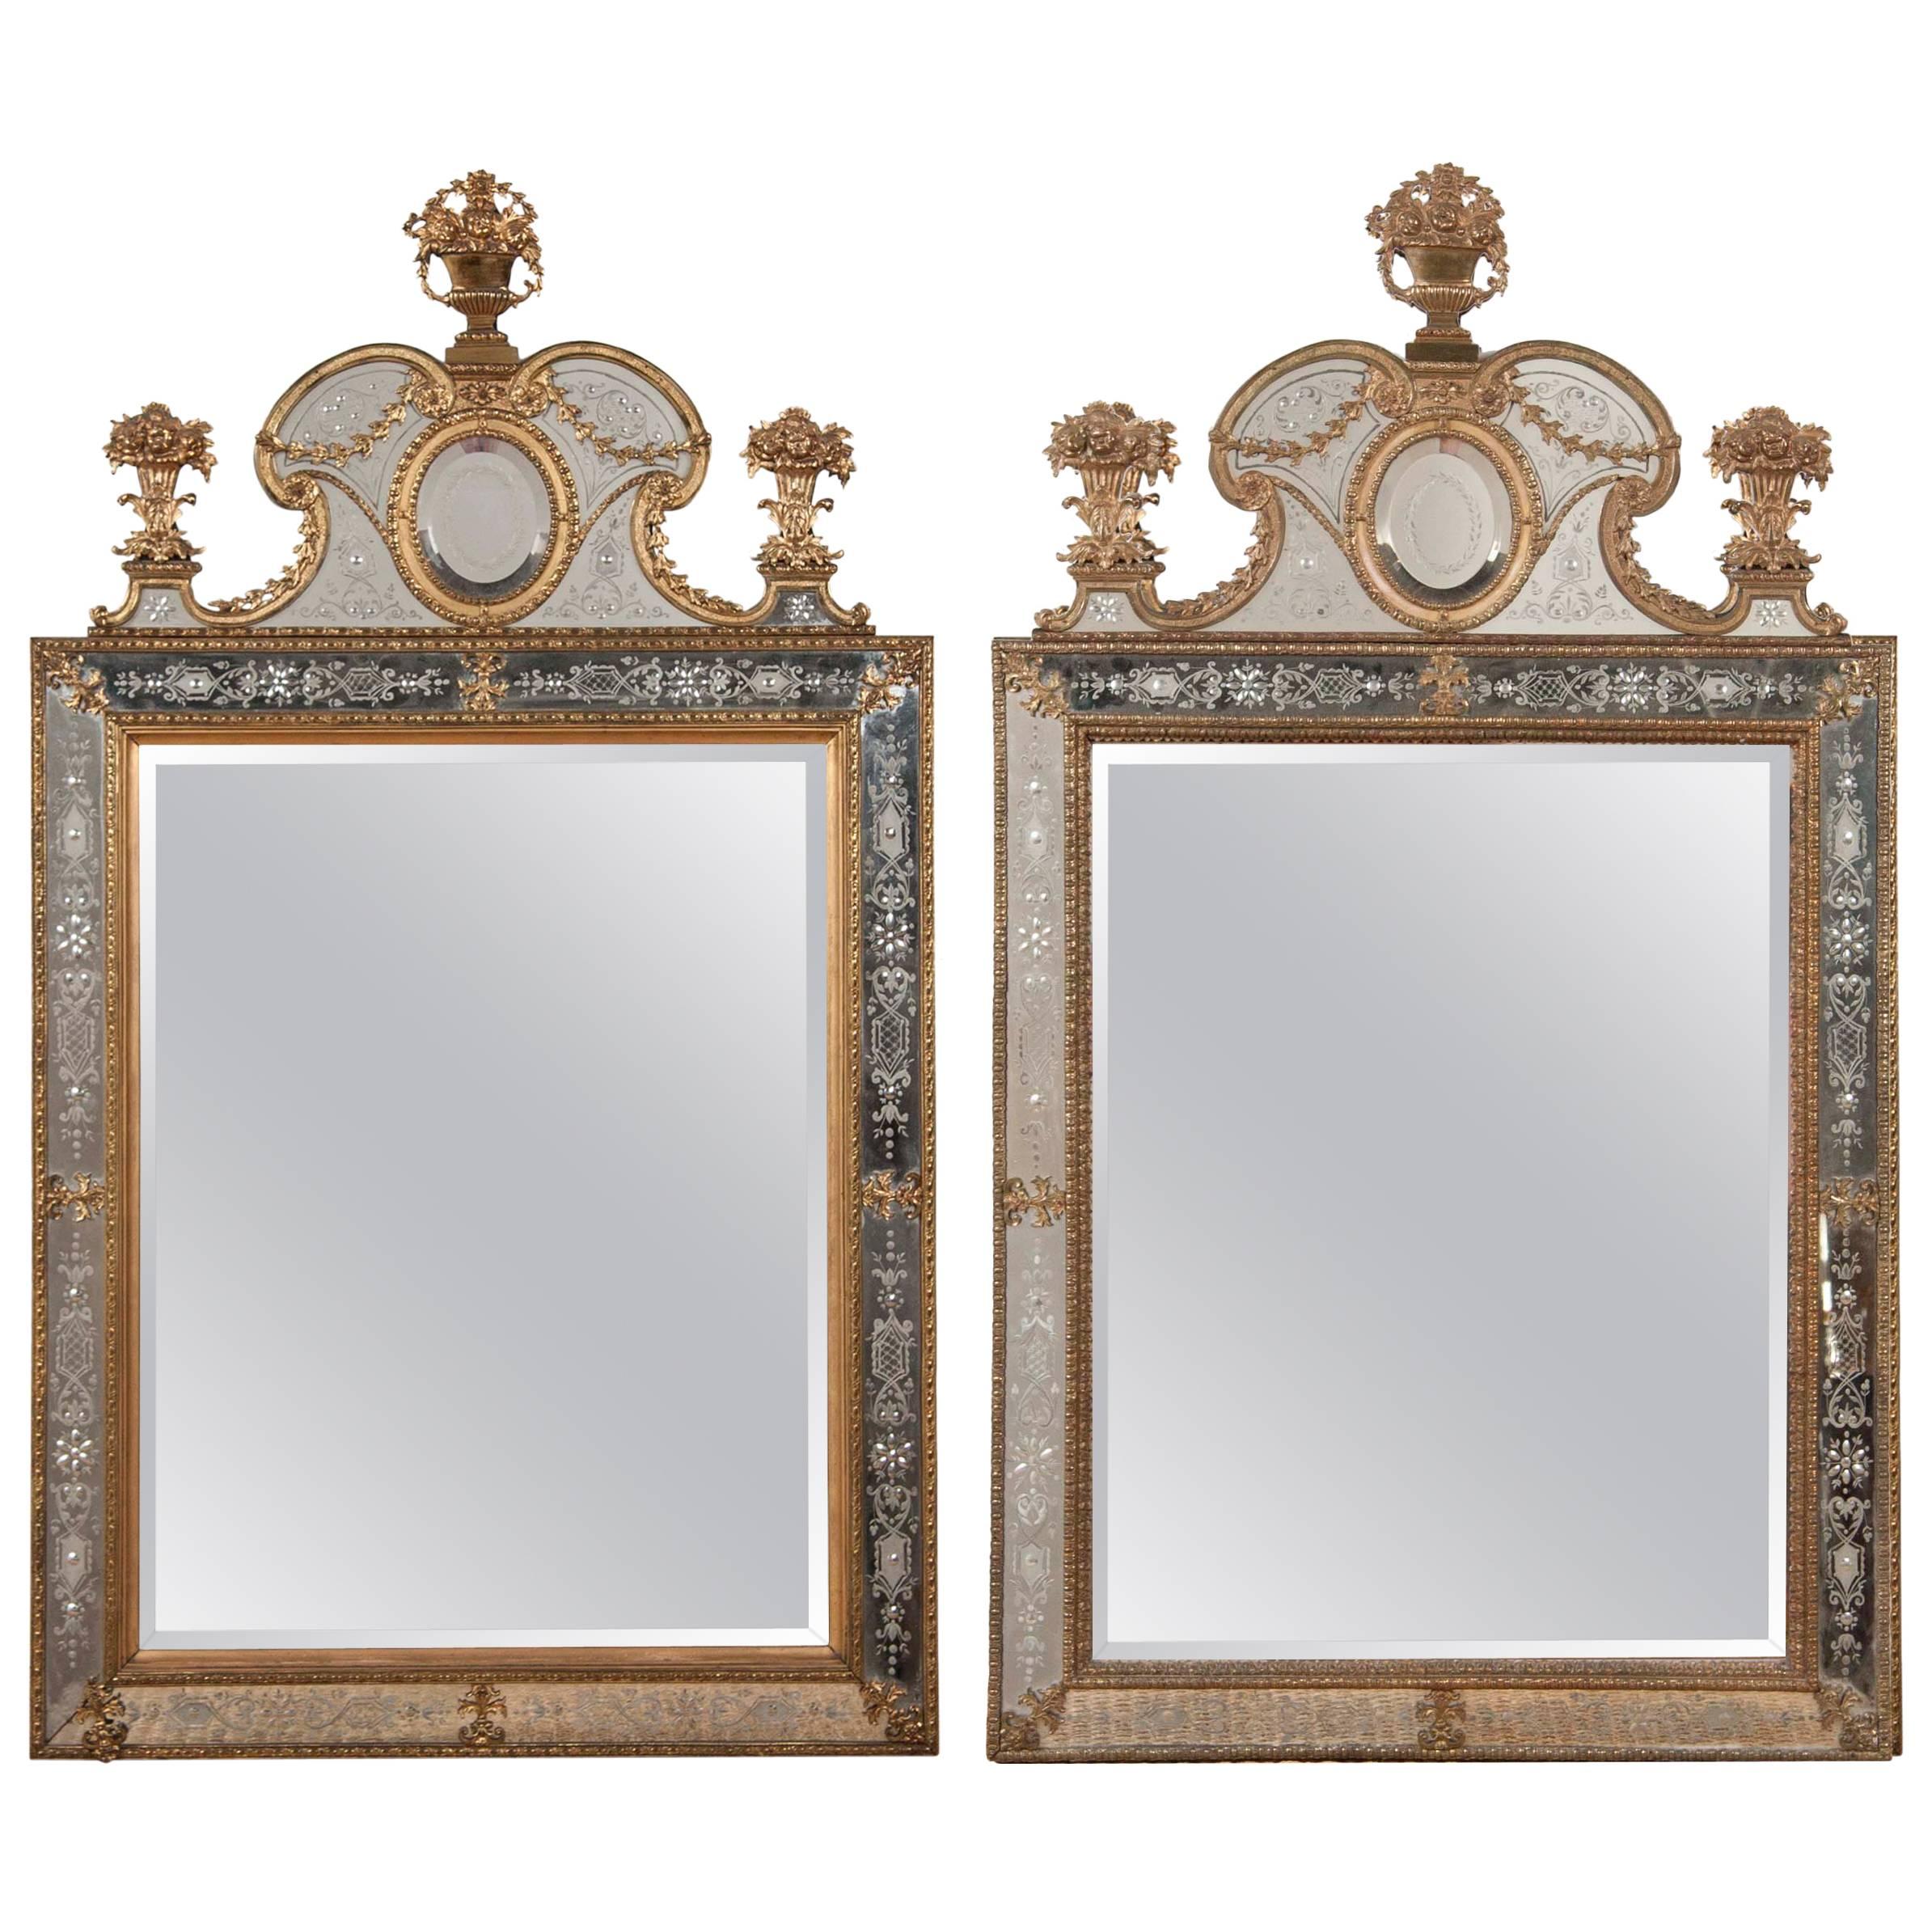 Matched Pair of Swedish Mirrors after the Model by Gustav Precht